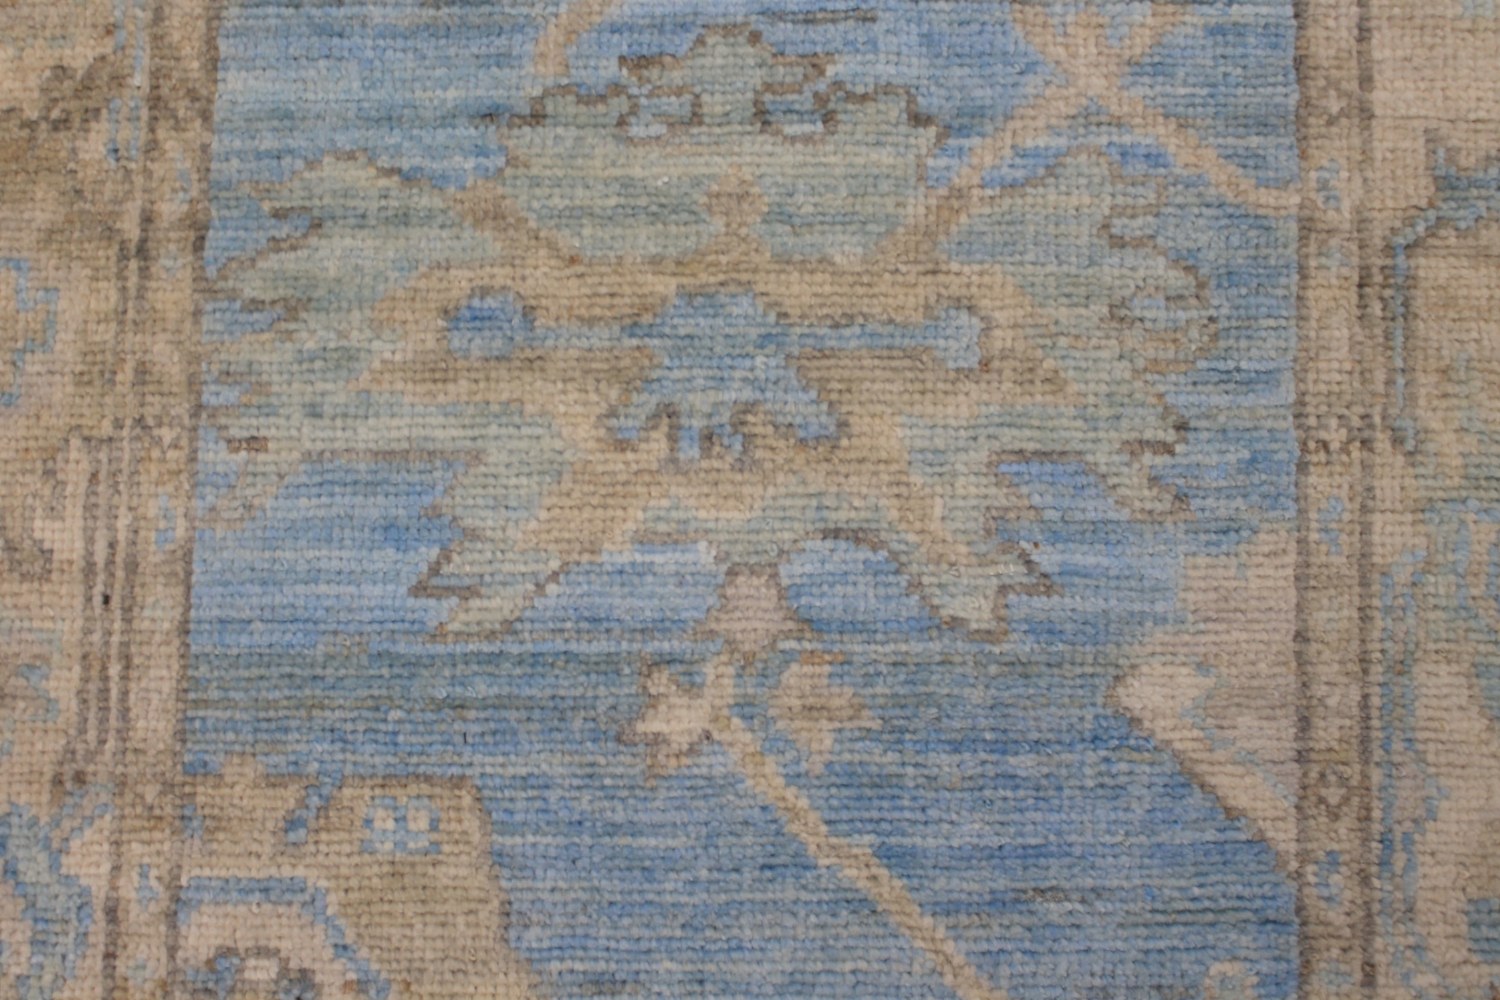 12 ft. Runner Oushak Hand Knotted Wool Area Rug - MR026562